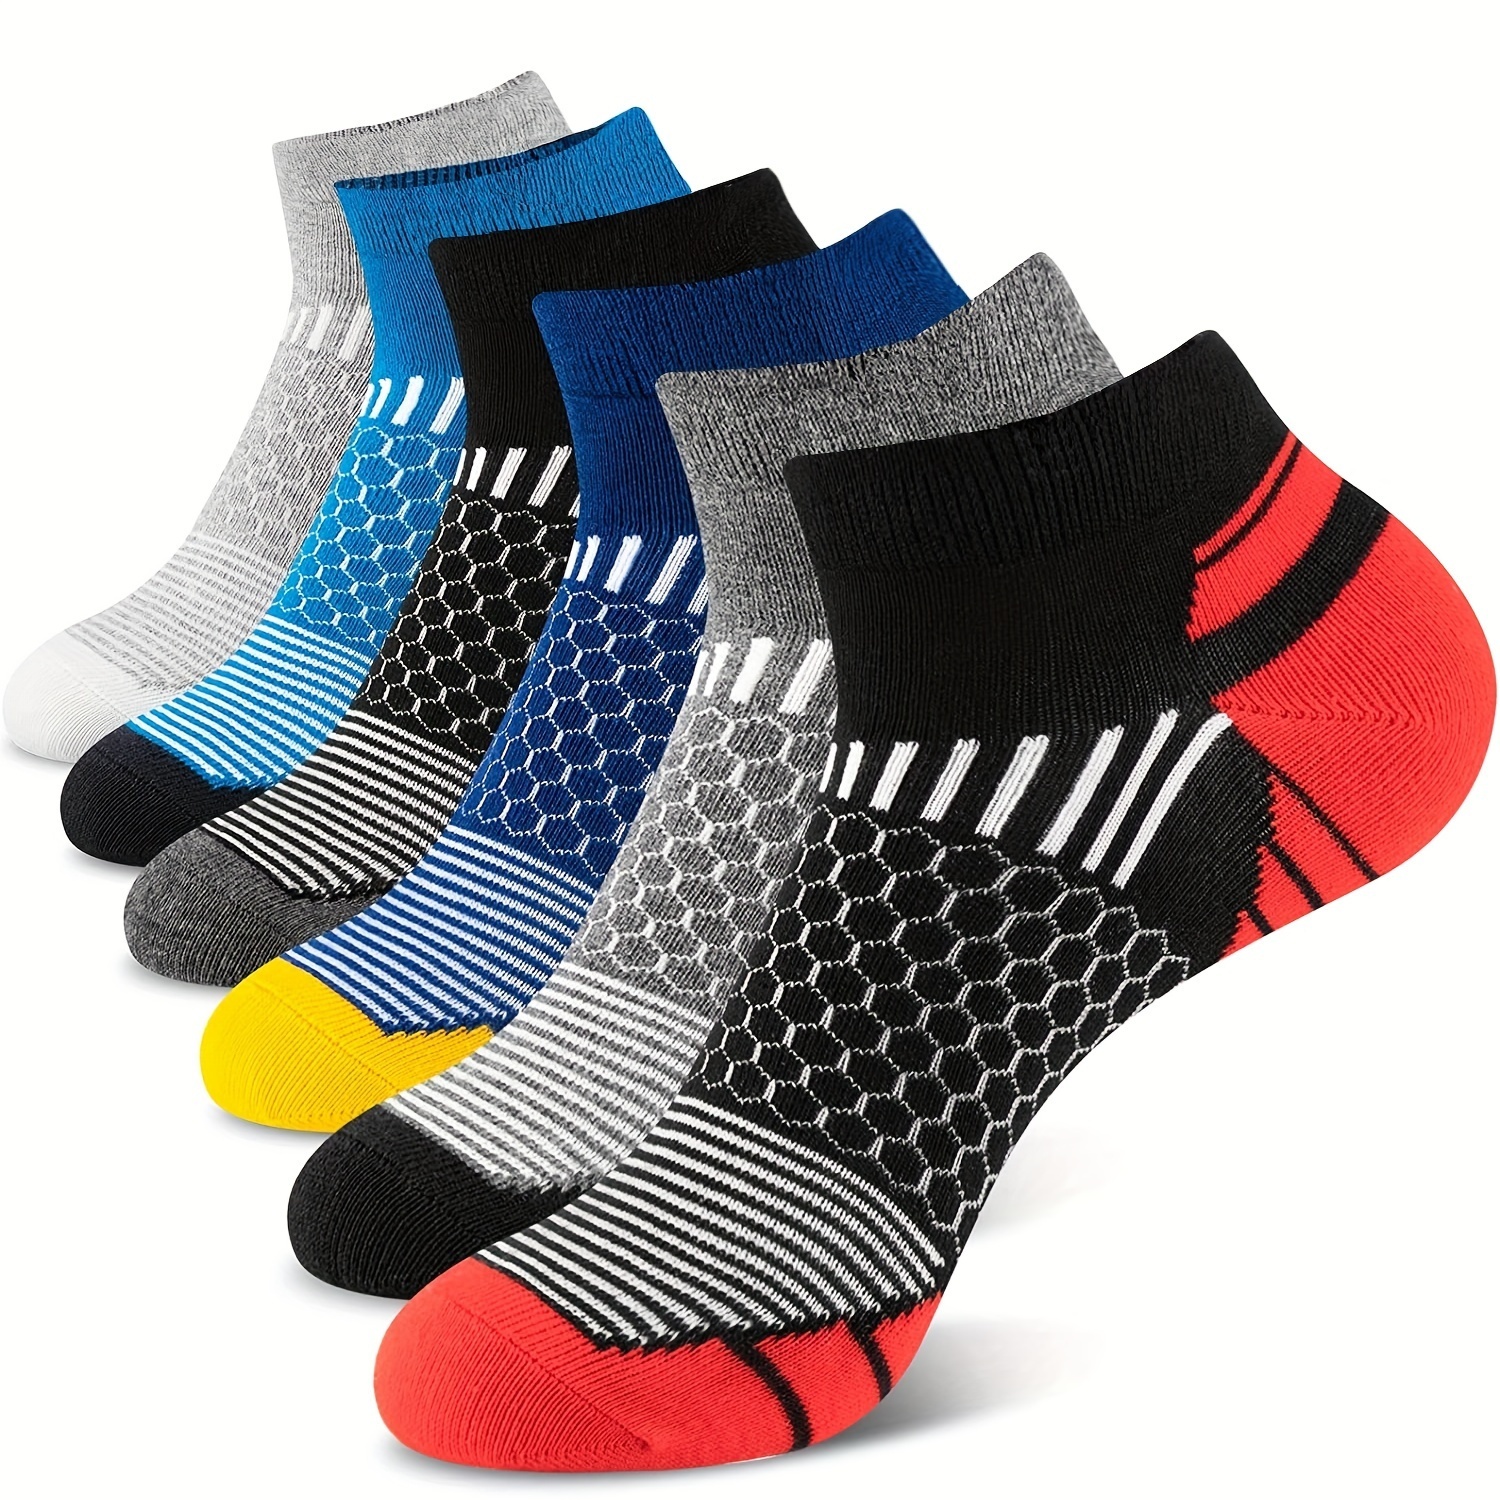 

6pairs Men's Cushioned Low Cut Athletic Ankle Socks For Running Hiking Cycling